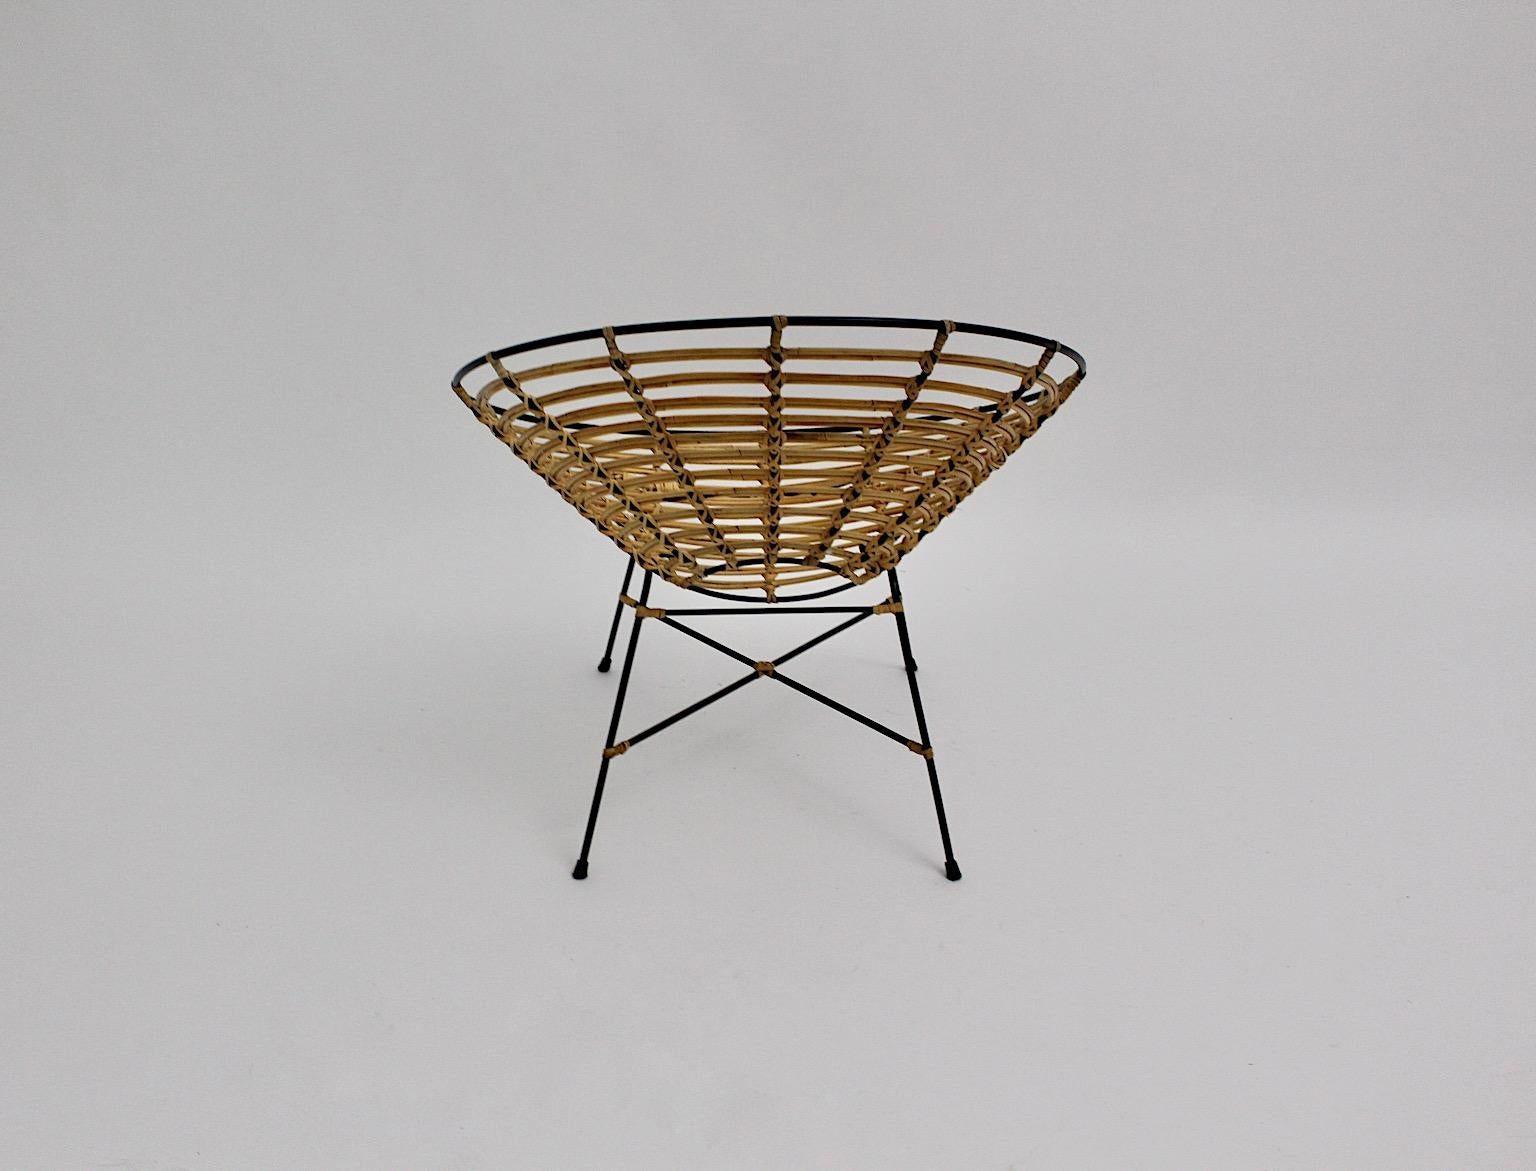 Bamboo Rattan Brown Vintage Mid-Century Modern Lounge Chair, Italy, 1960s For Sale 1